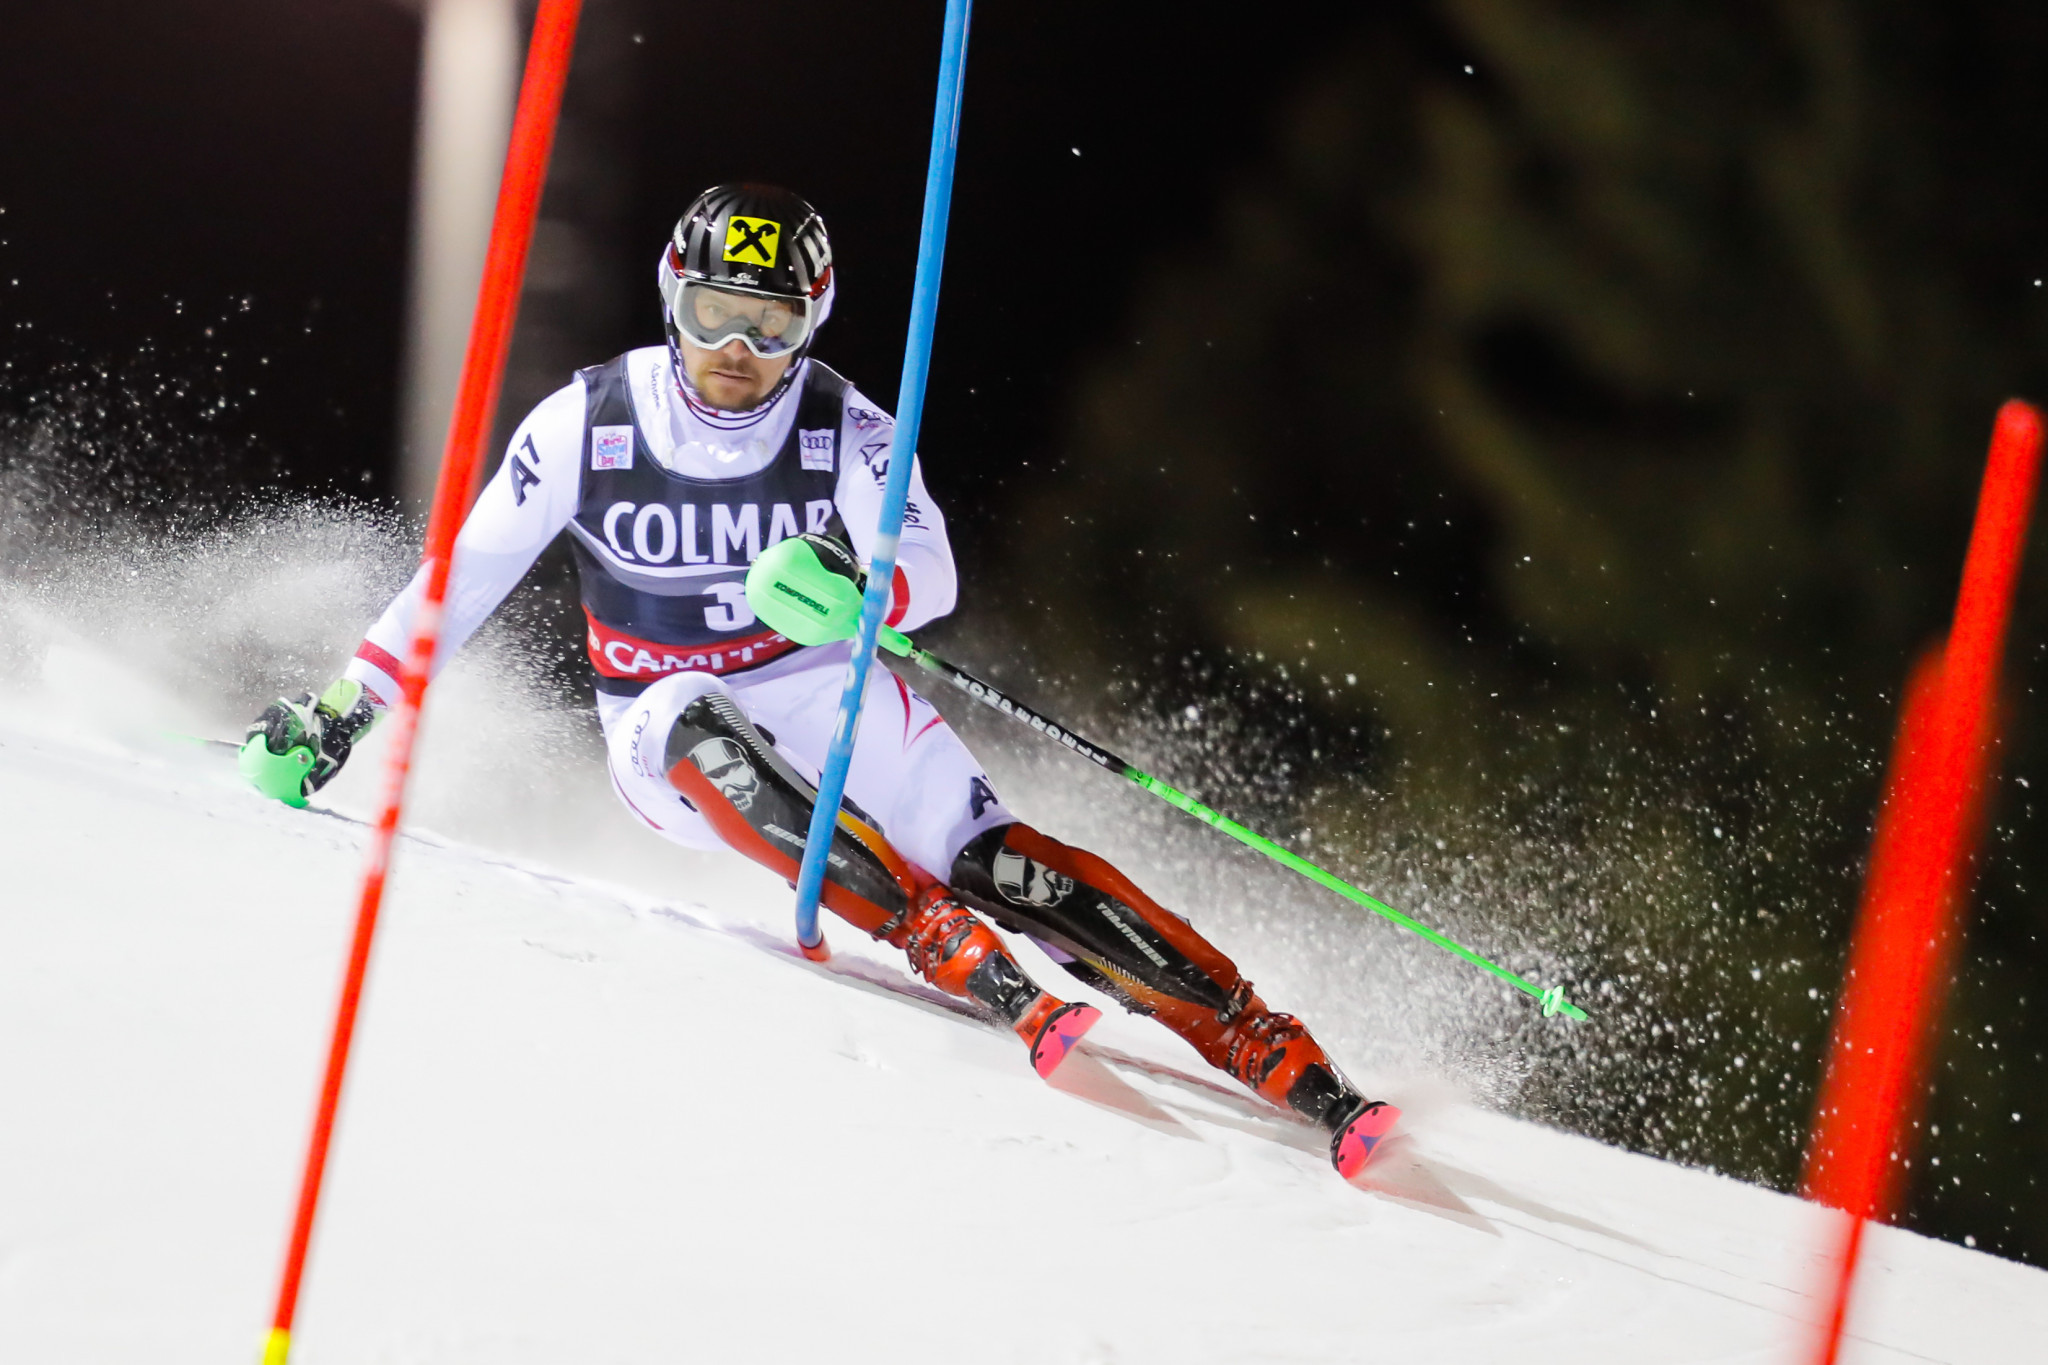 Austria's Marcel Hirscher claimed his fourth victory of the season ©Getty Images